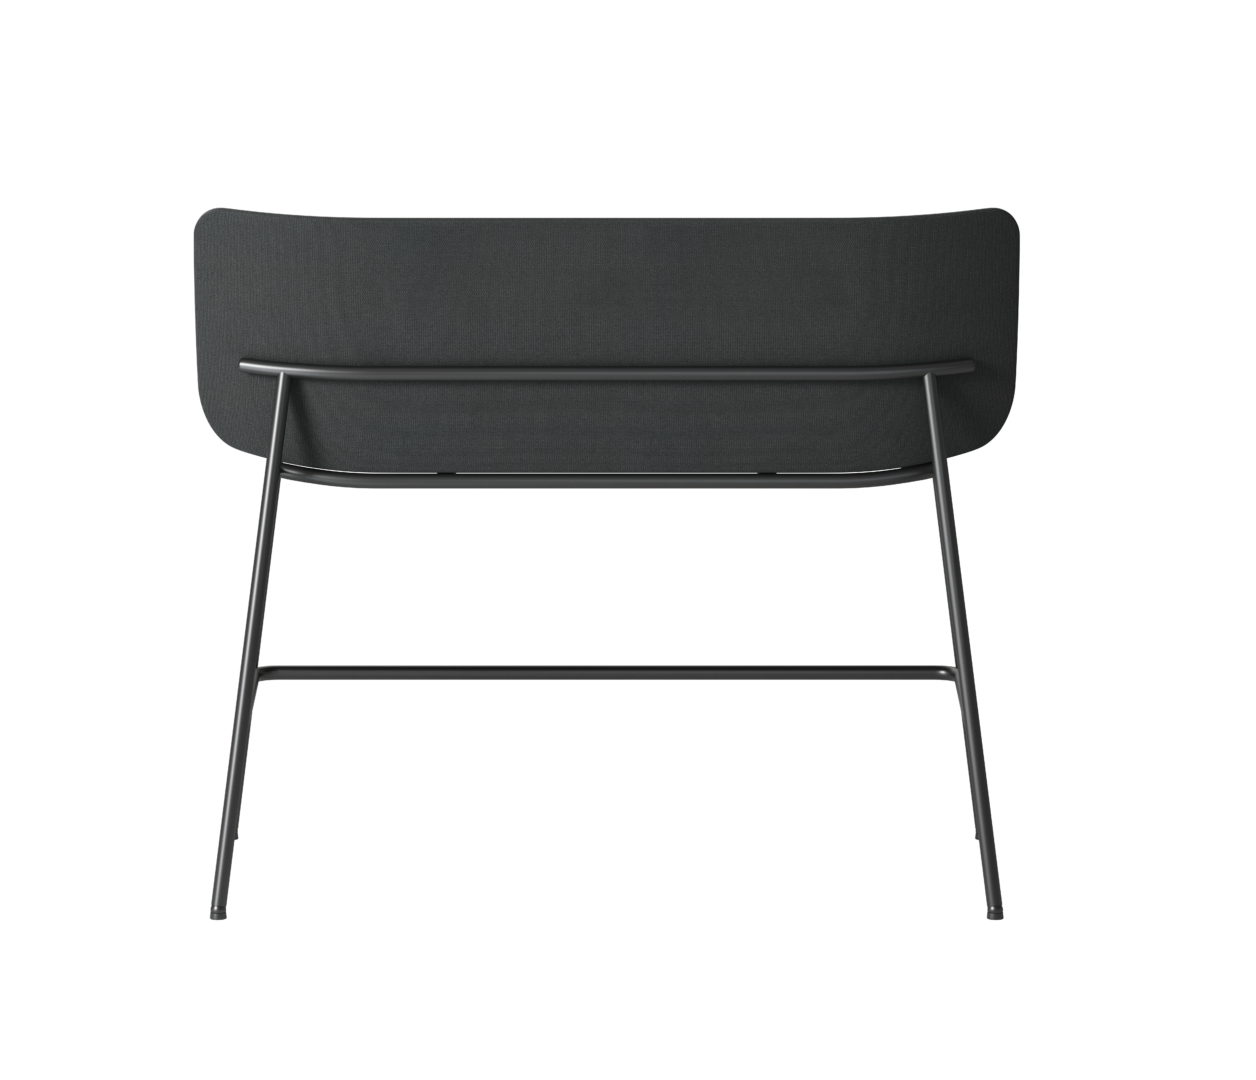 OCEE&FOUR – Stools & Benches – FourAll Bench Fully Upholstered – Packshot Image 3